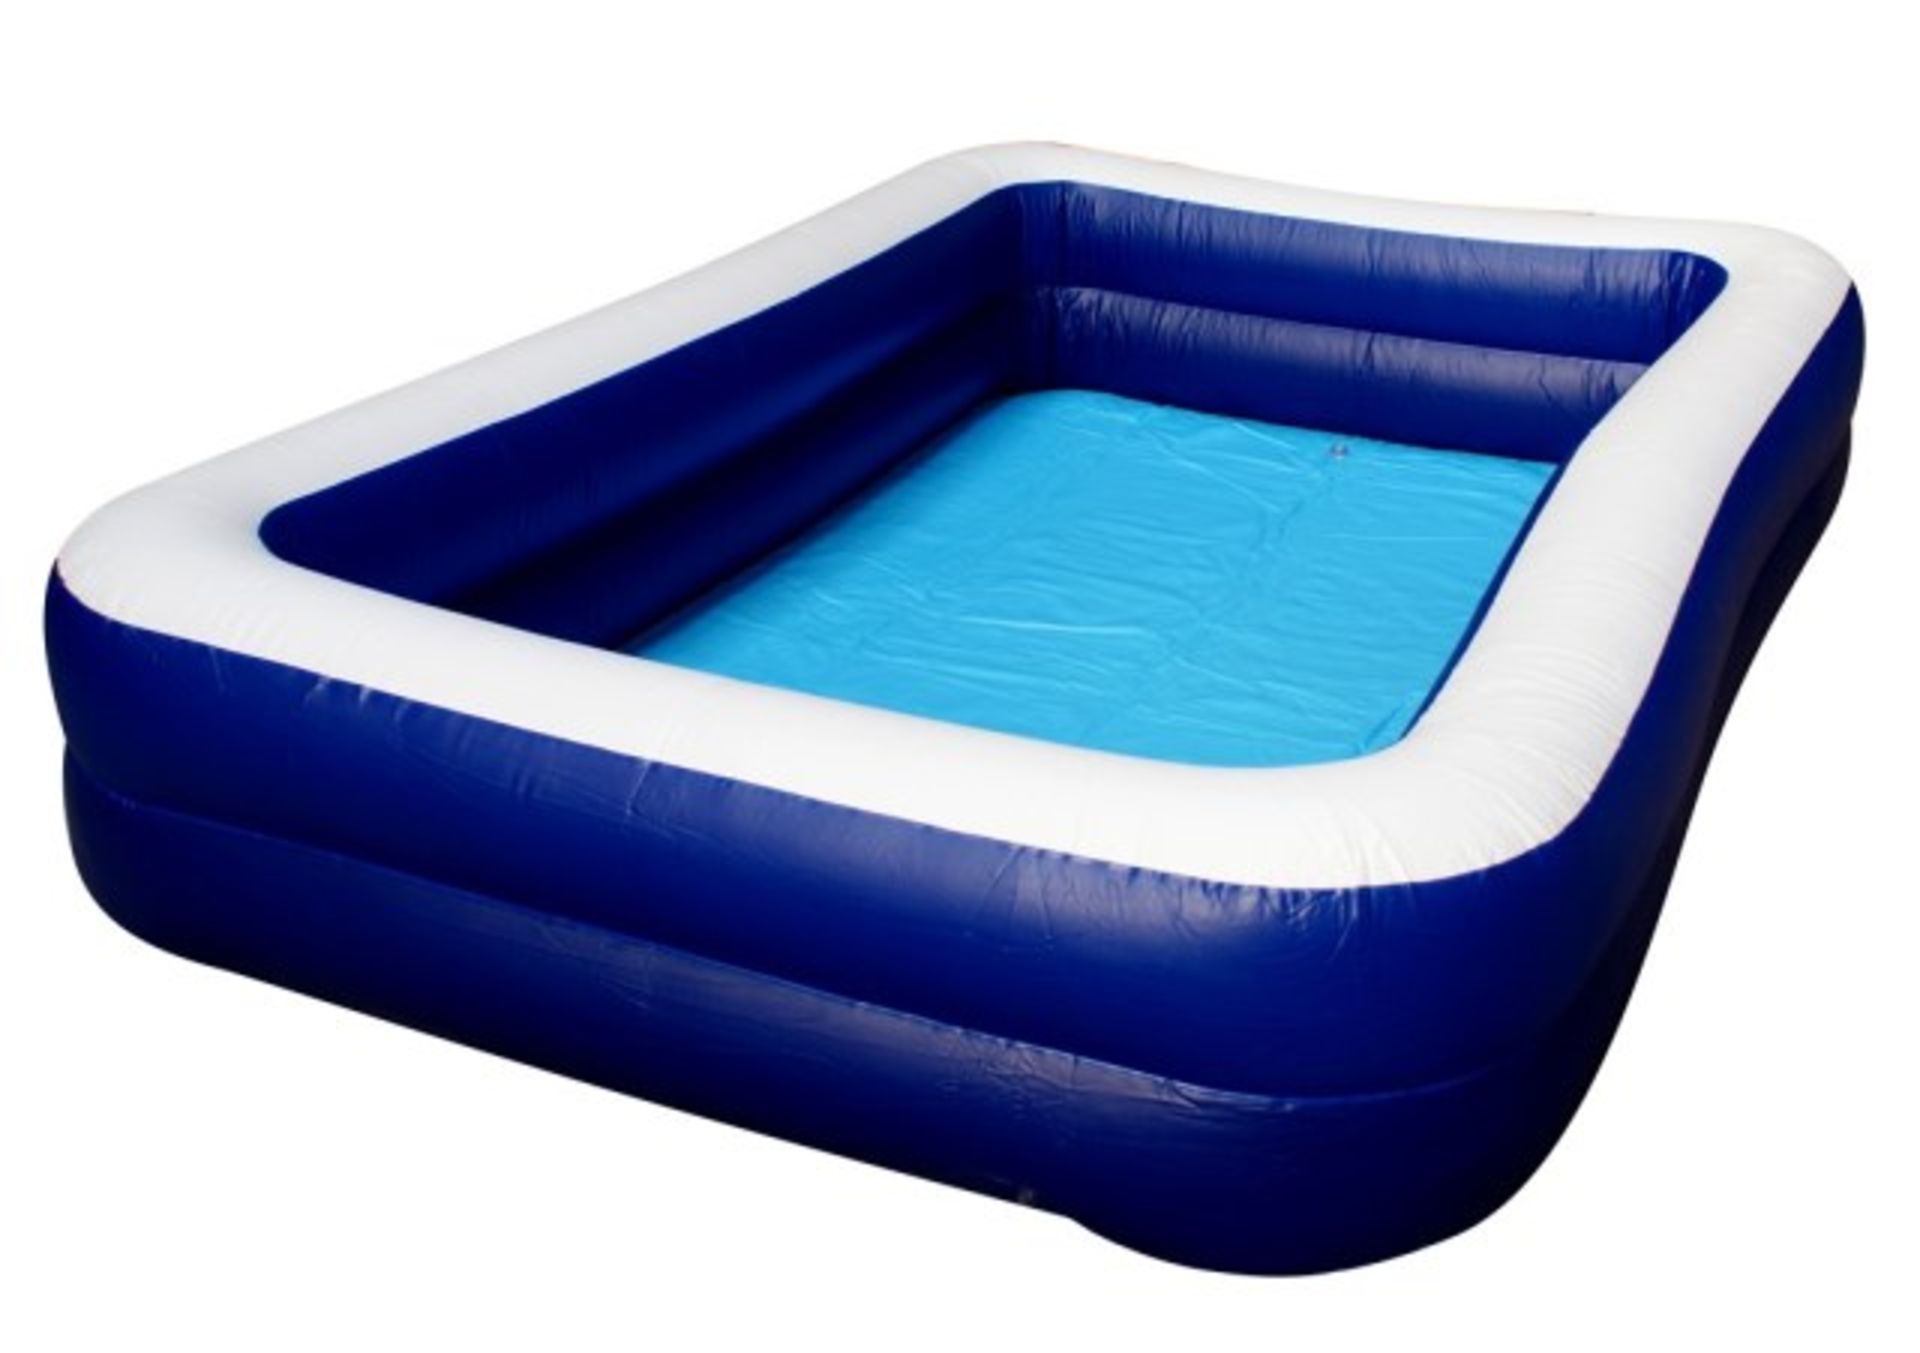 V *TRADE QTY* Brand New Family Paddling Pool 175x262x50cm X 4 YOUR BID PRICE TO BE MULTIPLIED BY